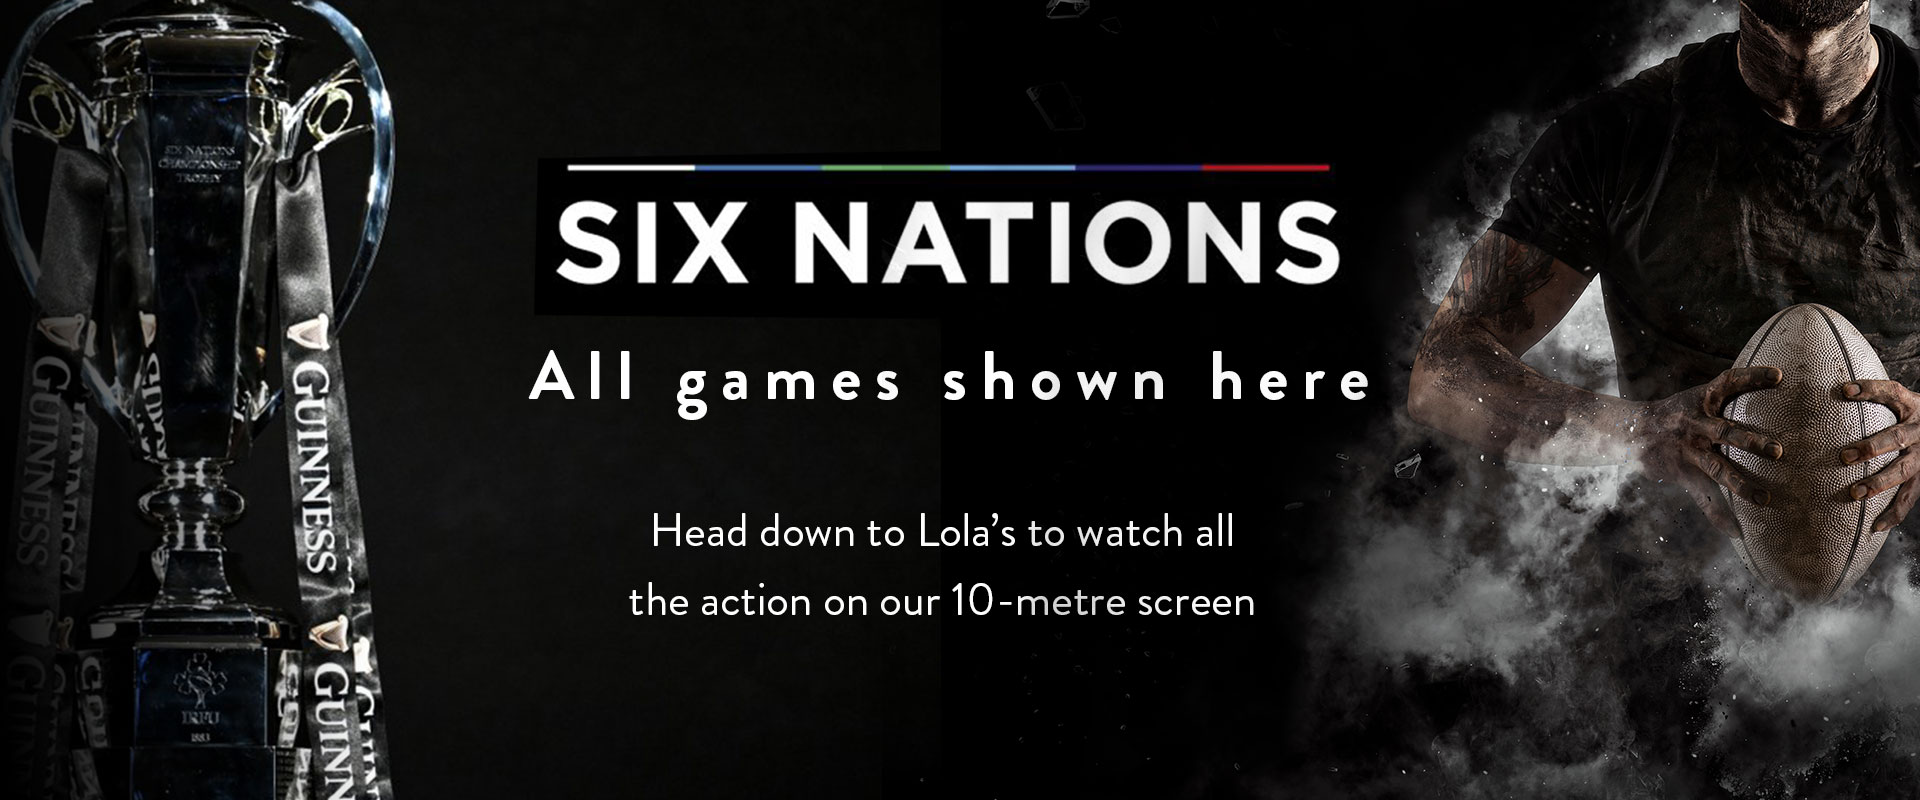 Banner-1920×800-6-nations